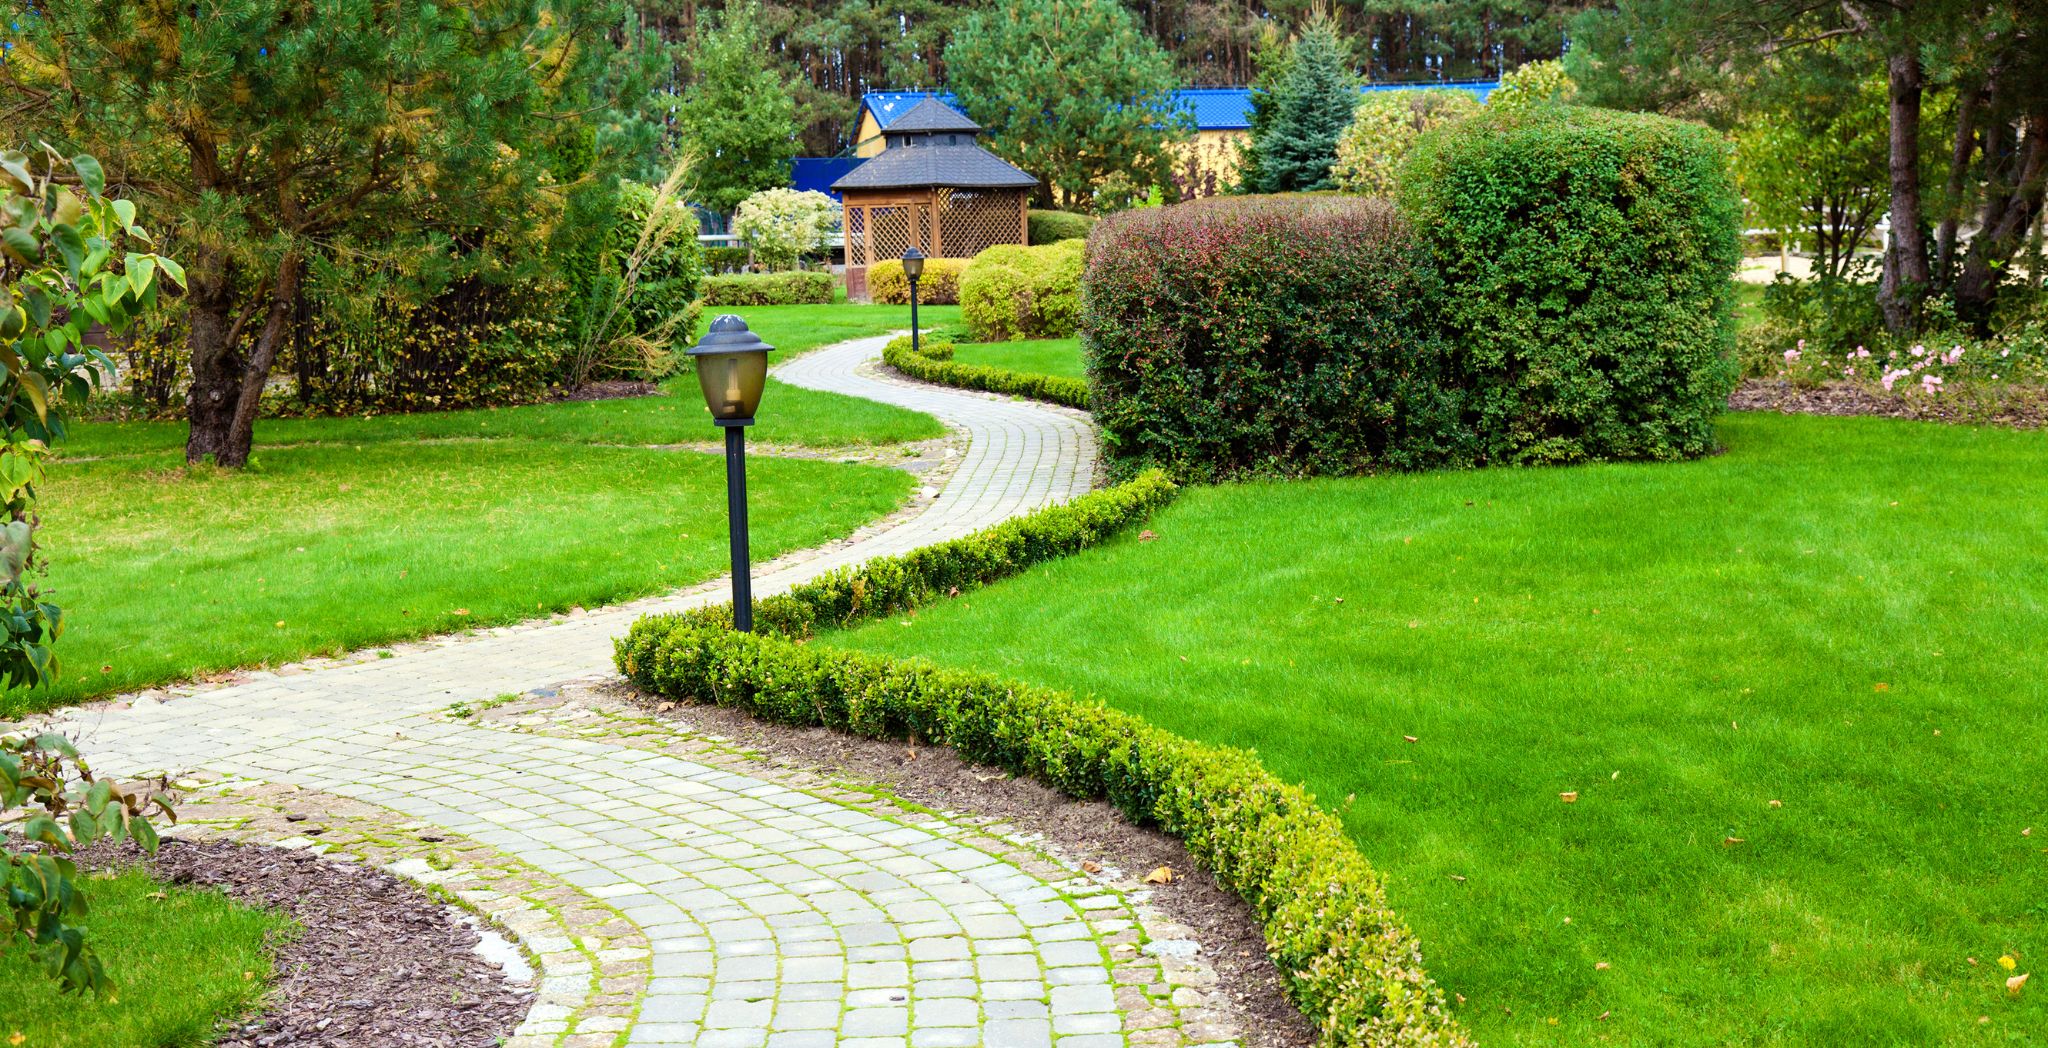 WSS landscape walkway stones Fi - Maximizing Curb Appeal Of Your Home With Landscape Stone Walkways